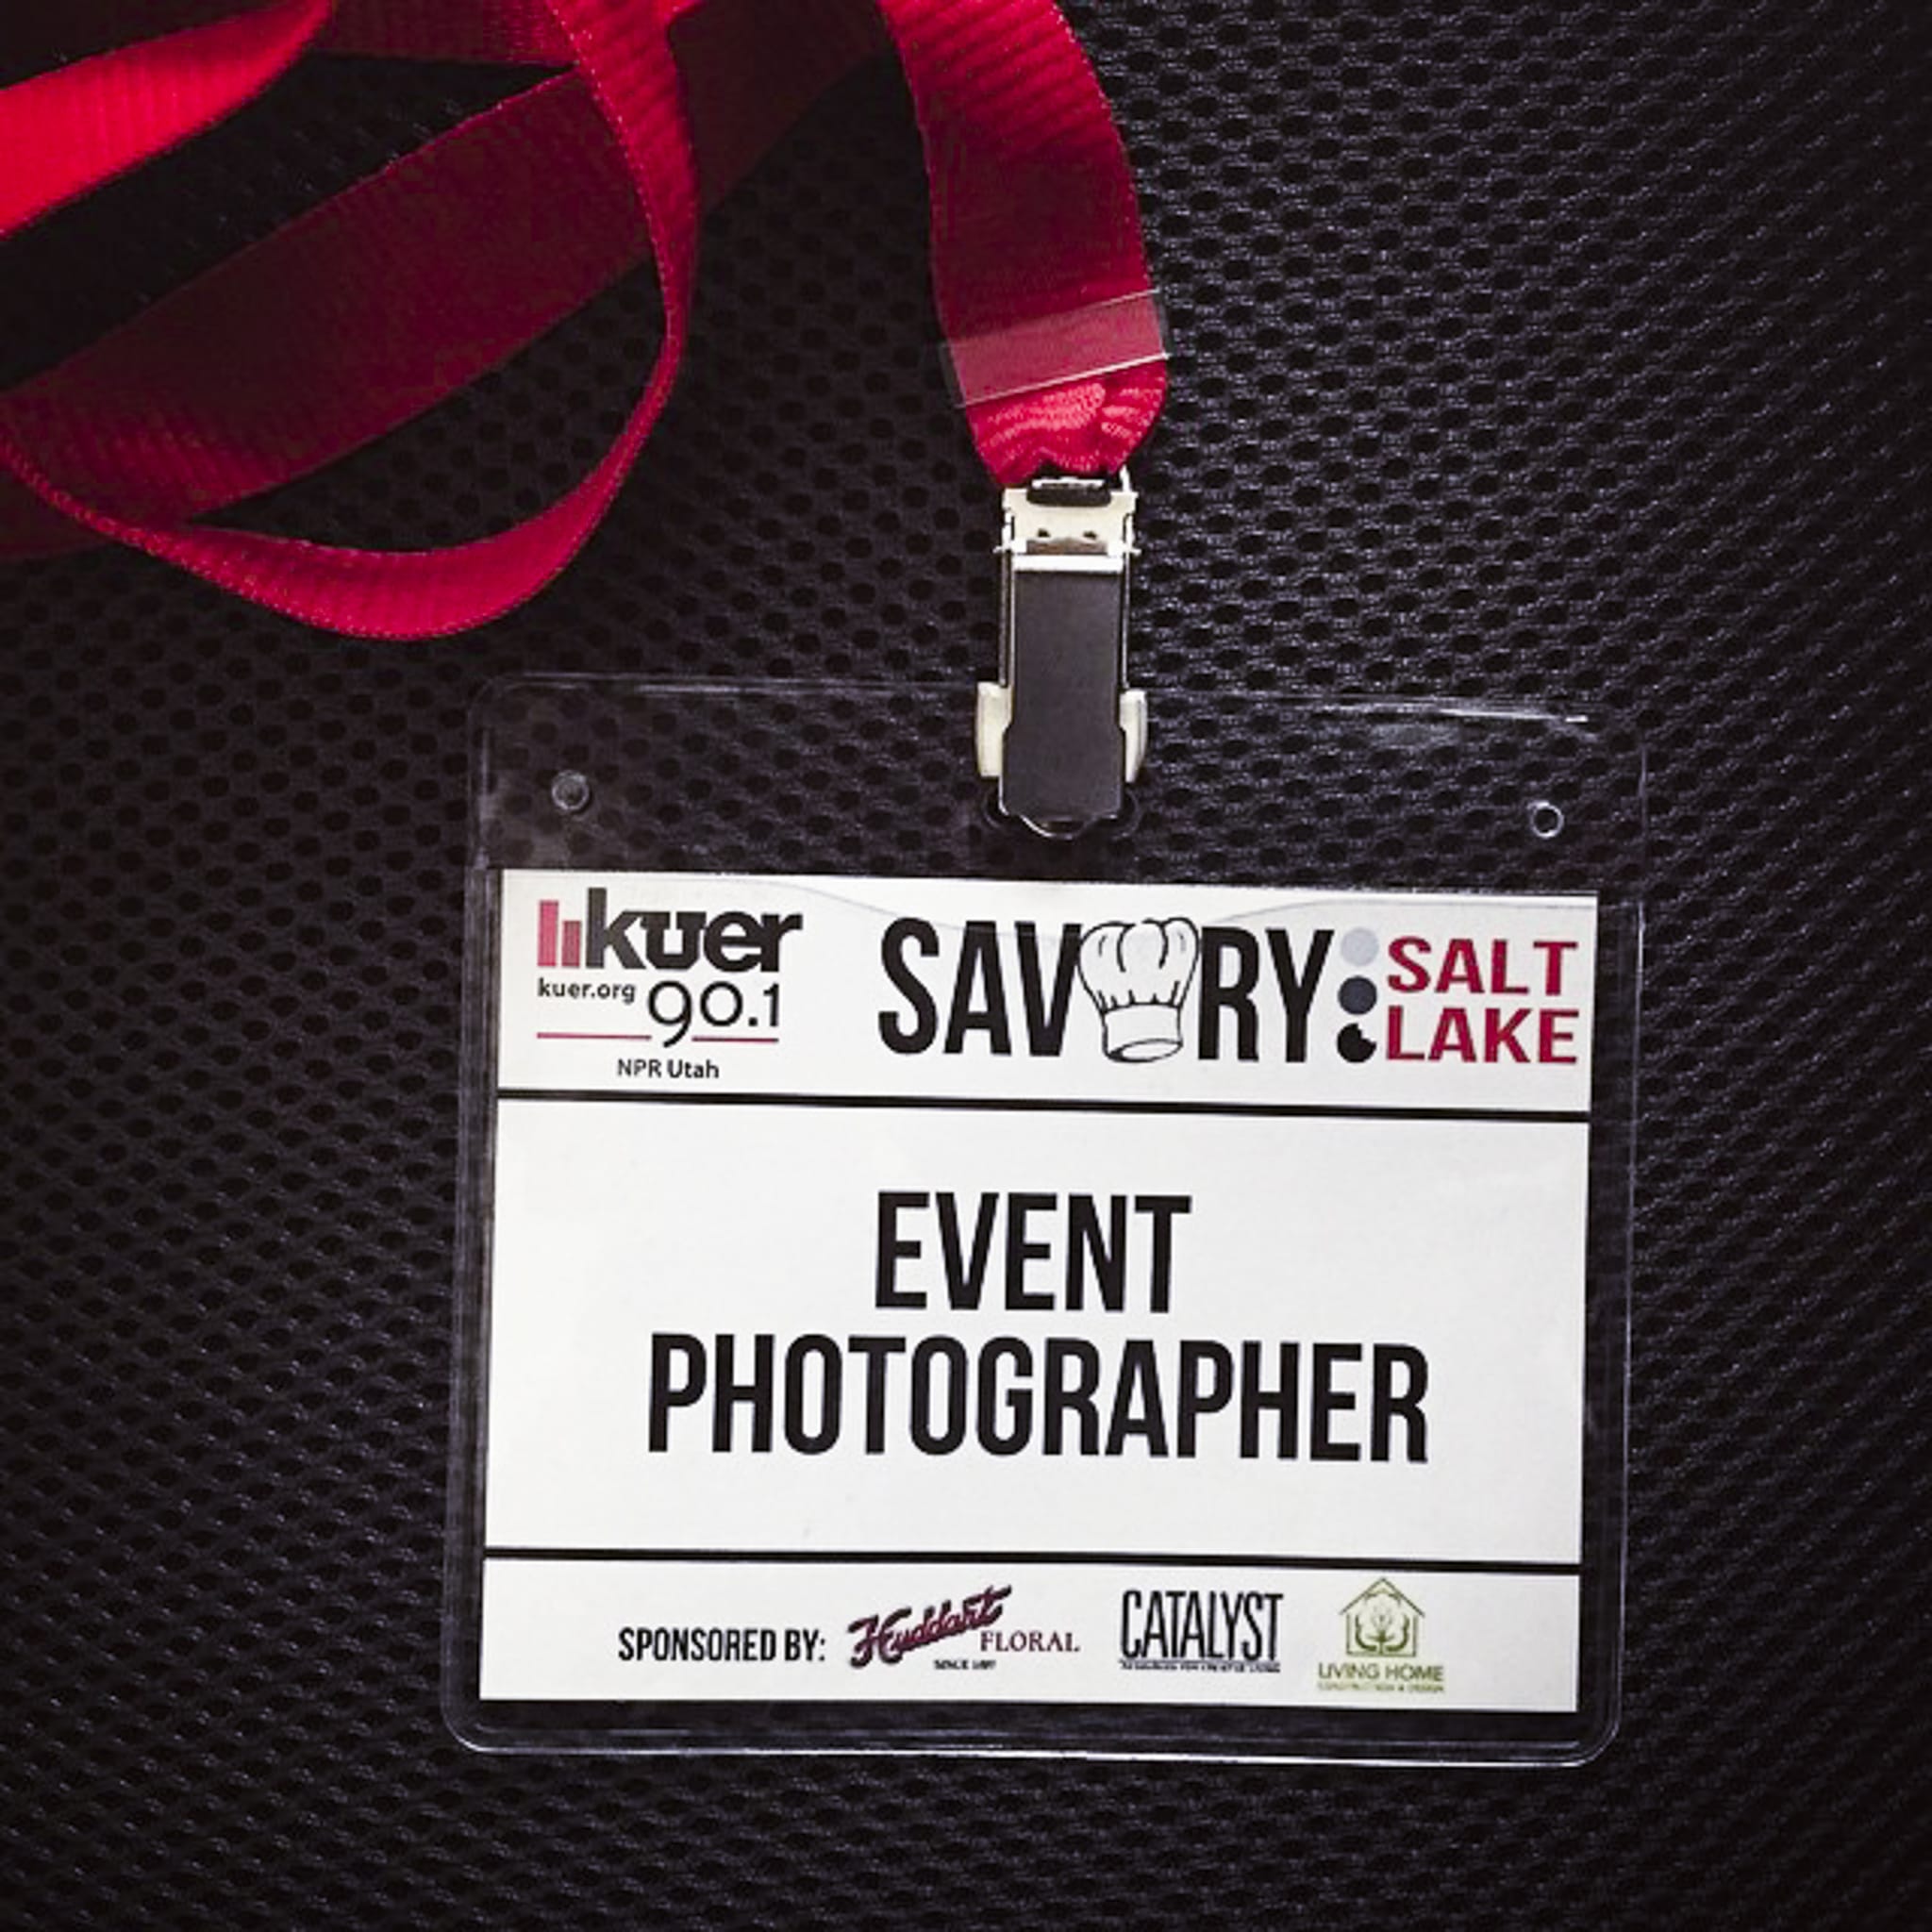 A bade and lanyard for an event photographer at Savory Salt Lake.